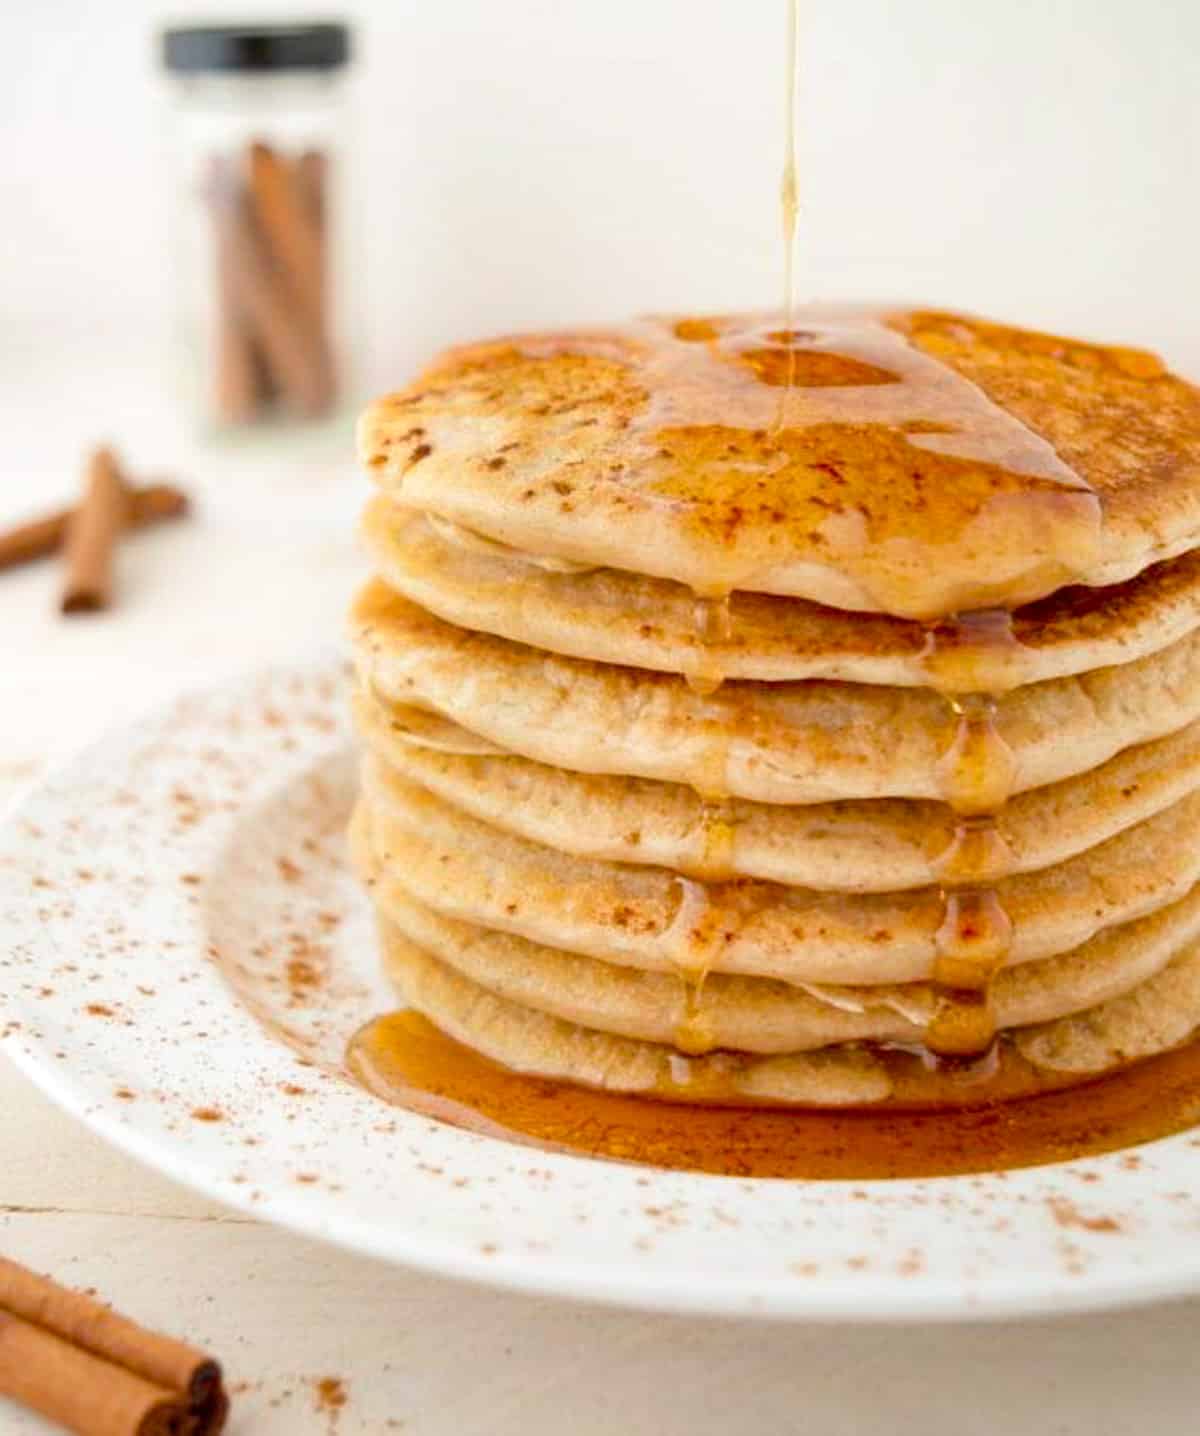 Maple syrup being drizzled onto a stack of vegan cinnamon pancakes.